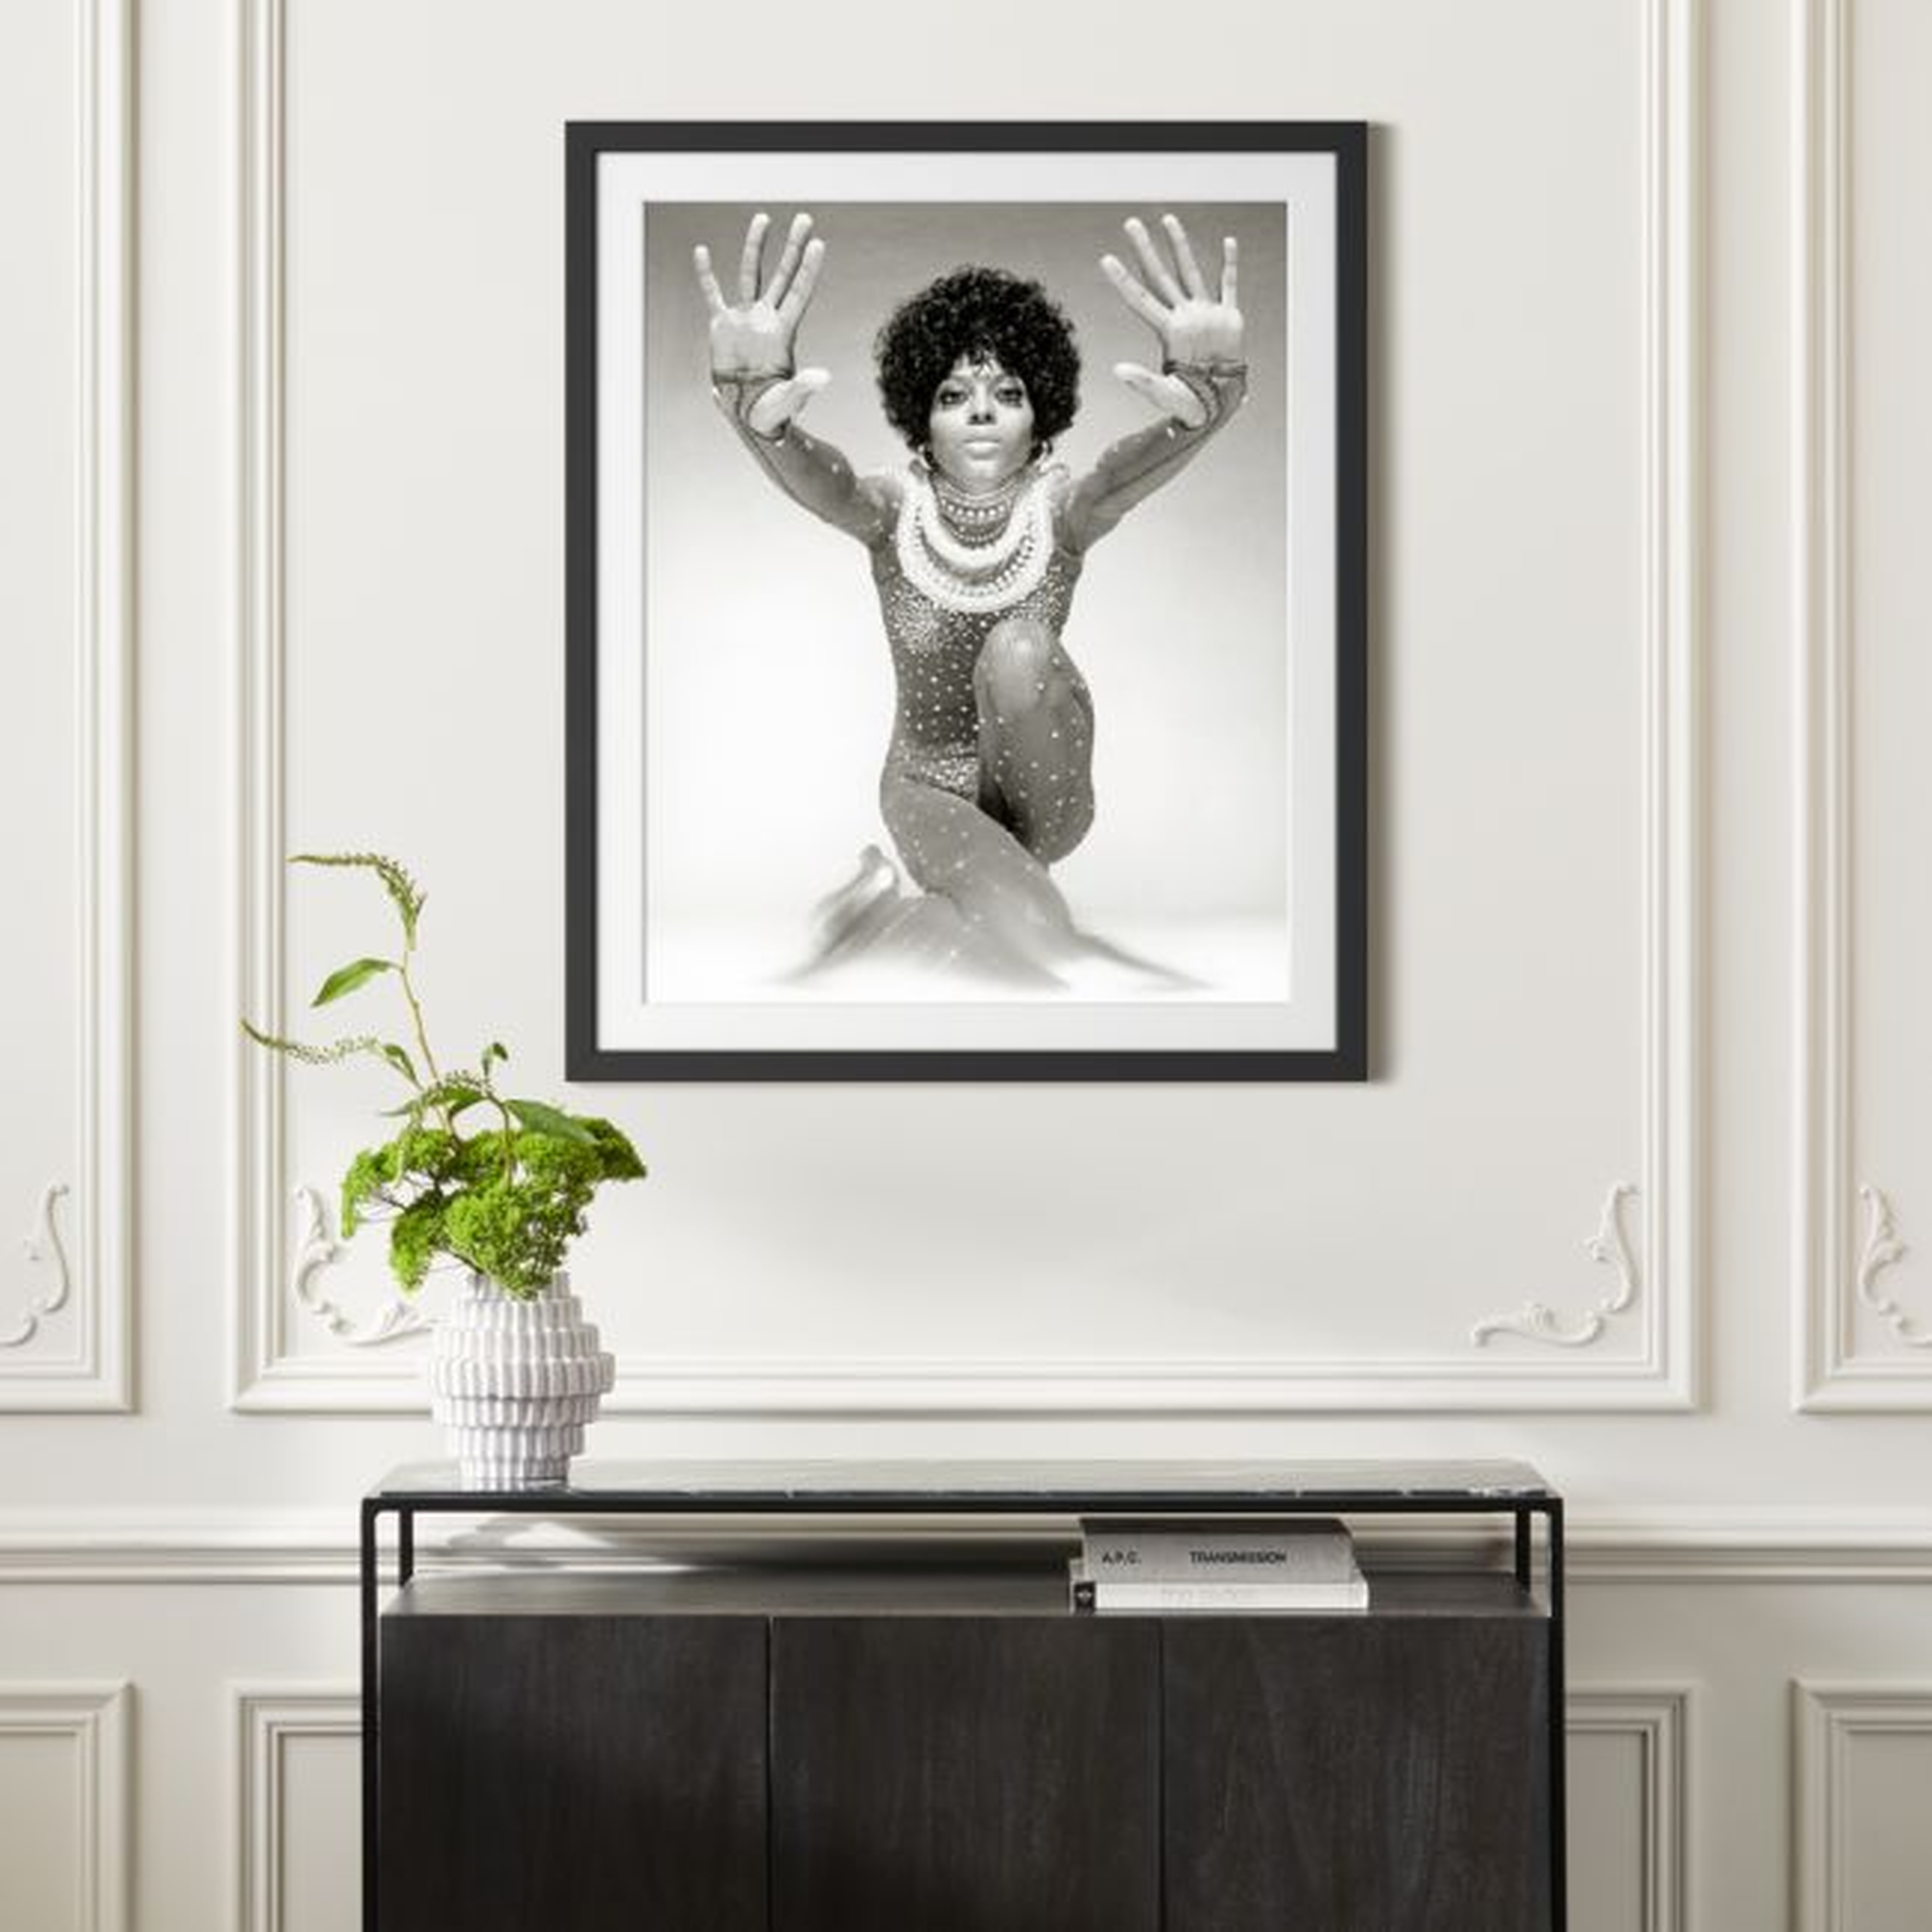 'Diana Ross Reaching Out' Photographic Print in Black Frame 33"x39.5" - CB2